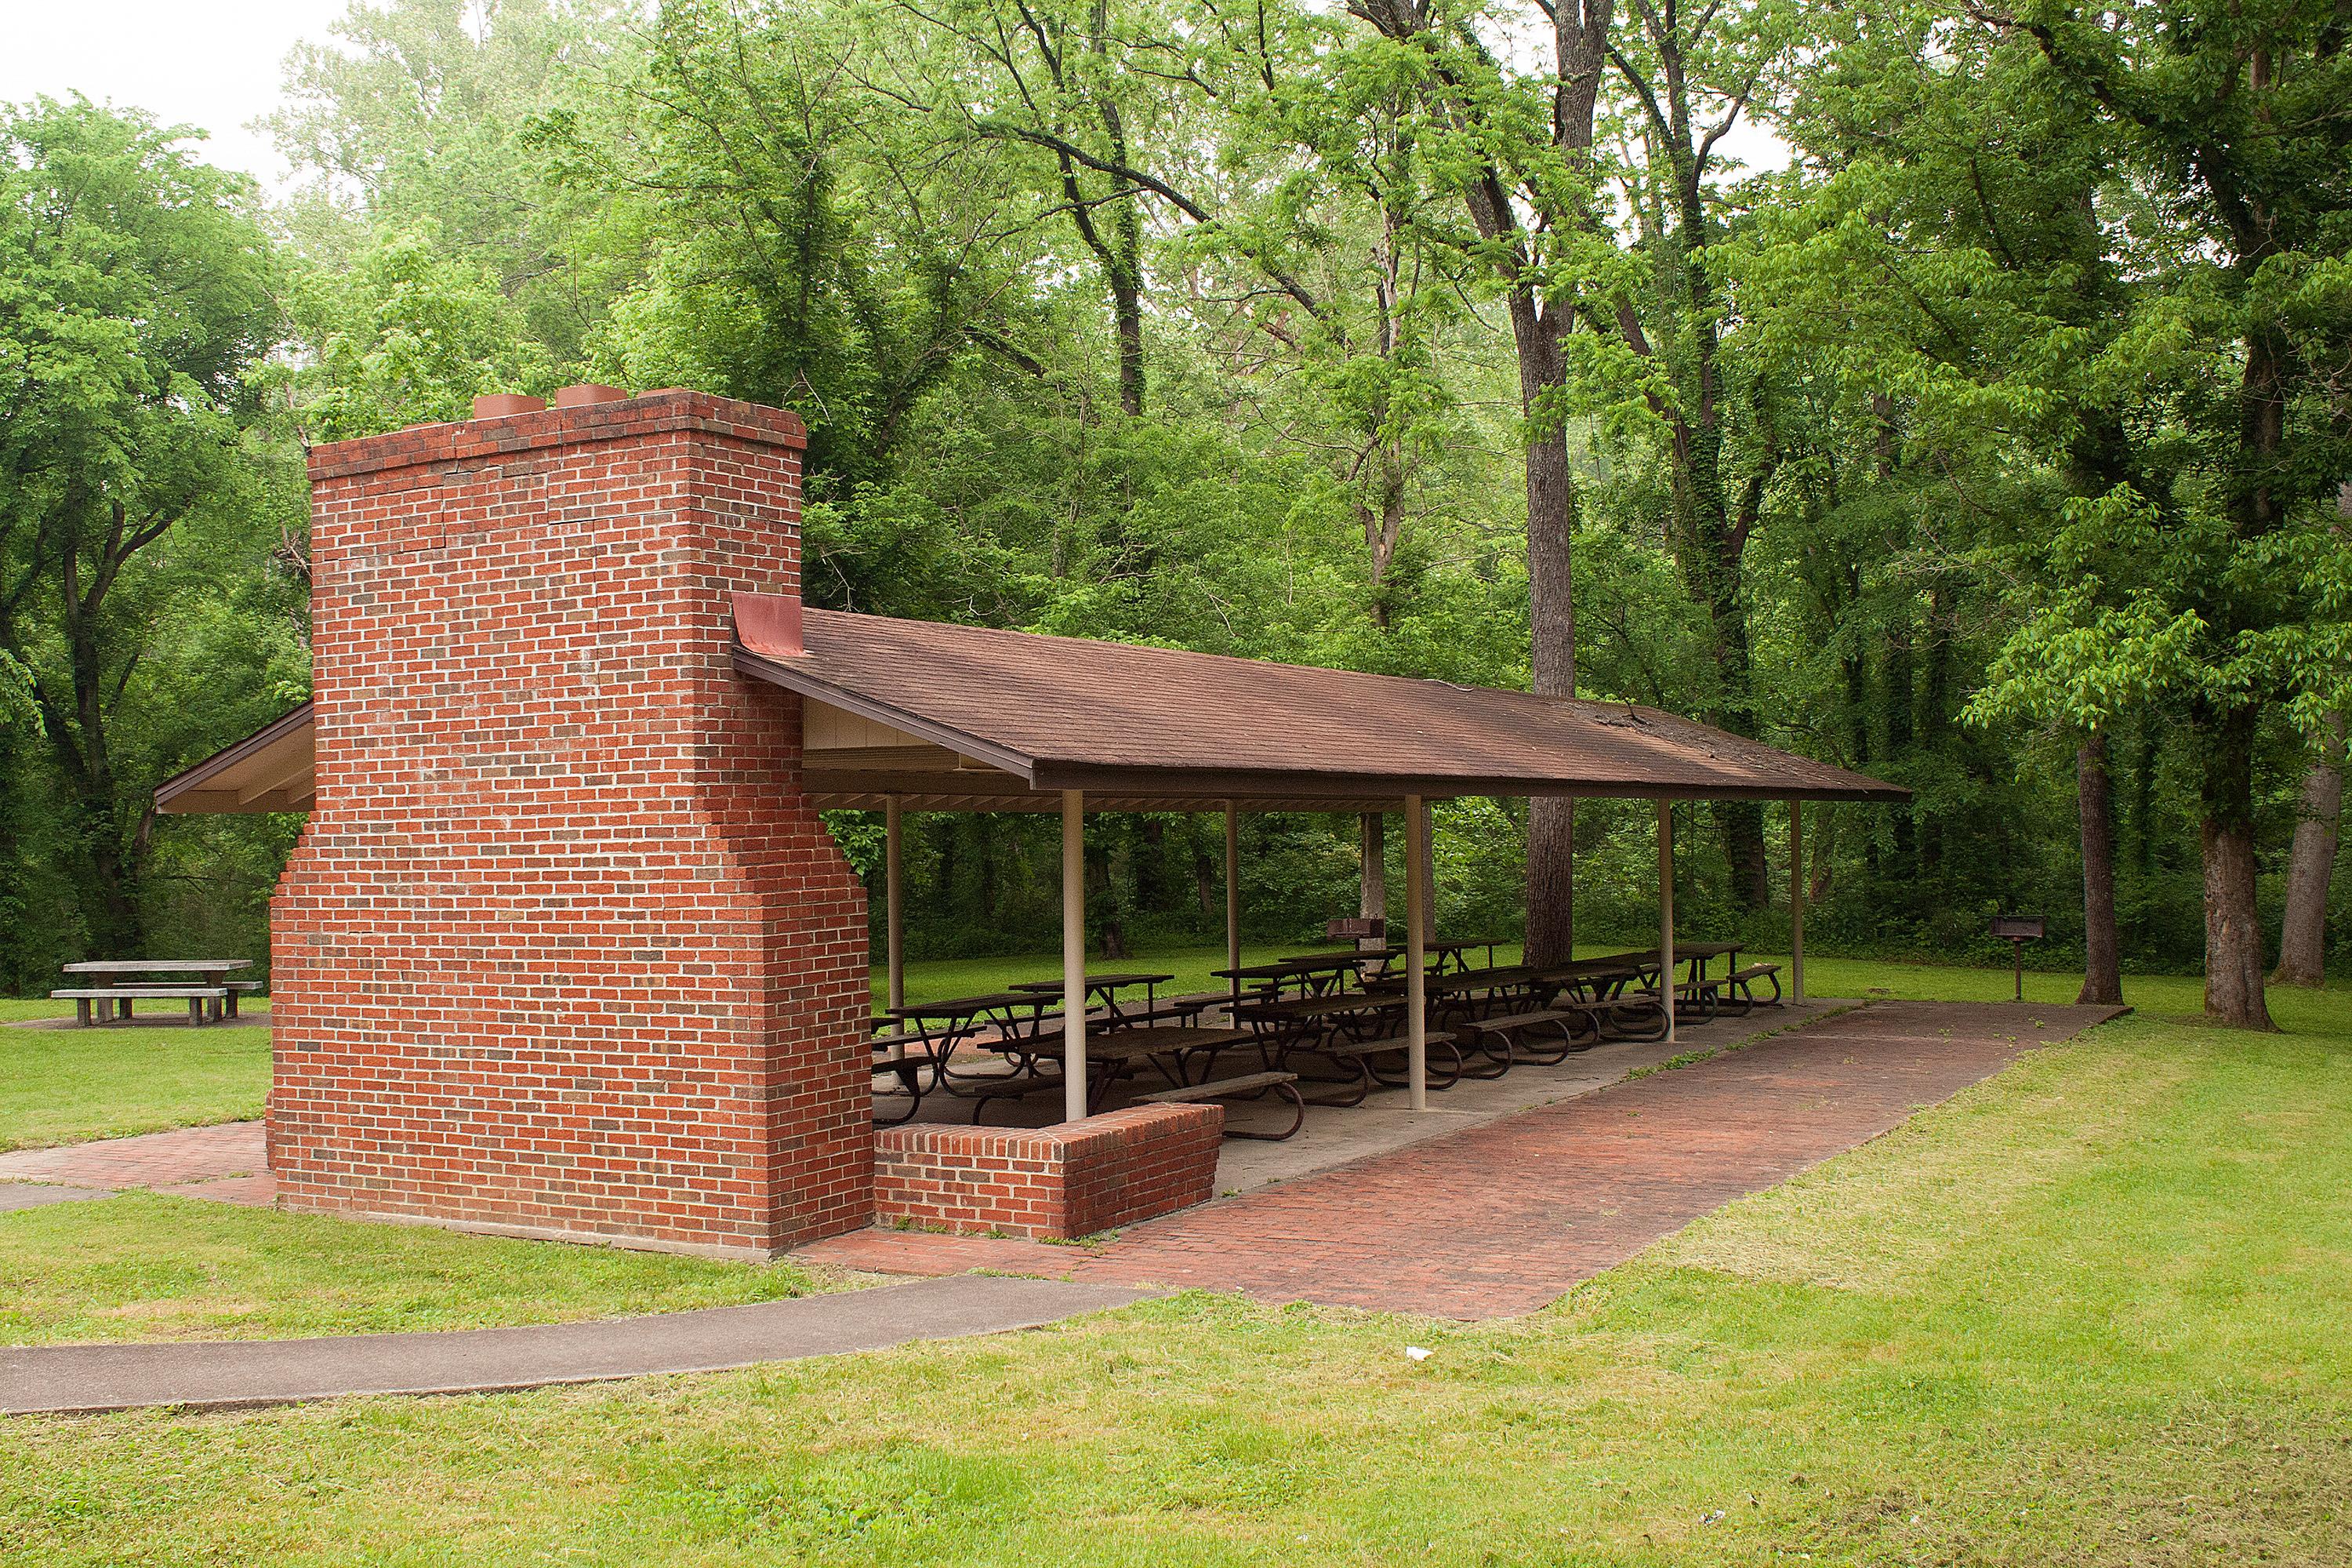 An open-air picnic shelter with multiple picnic tables and a brick fireplace.